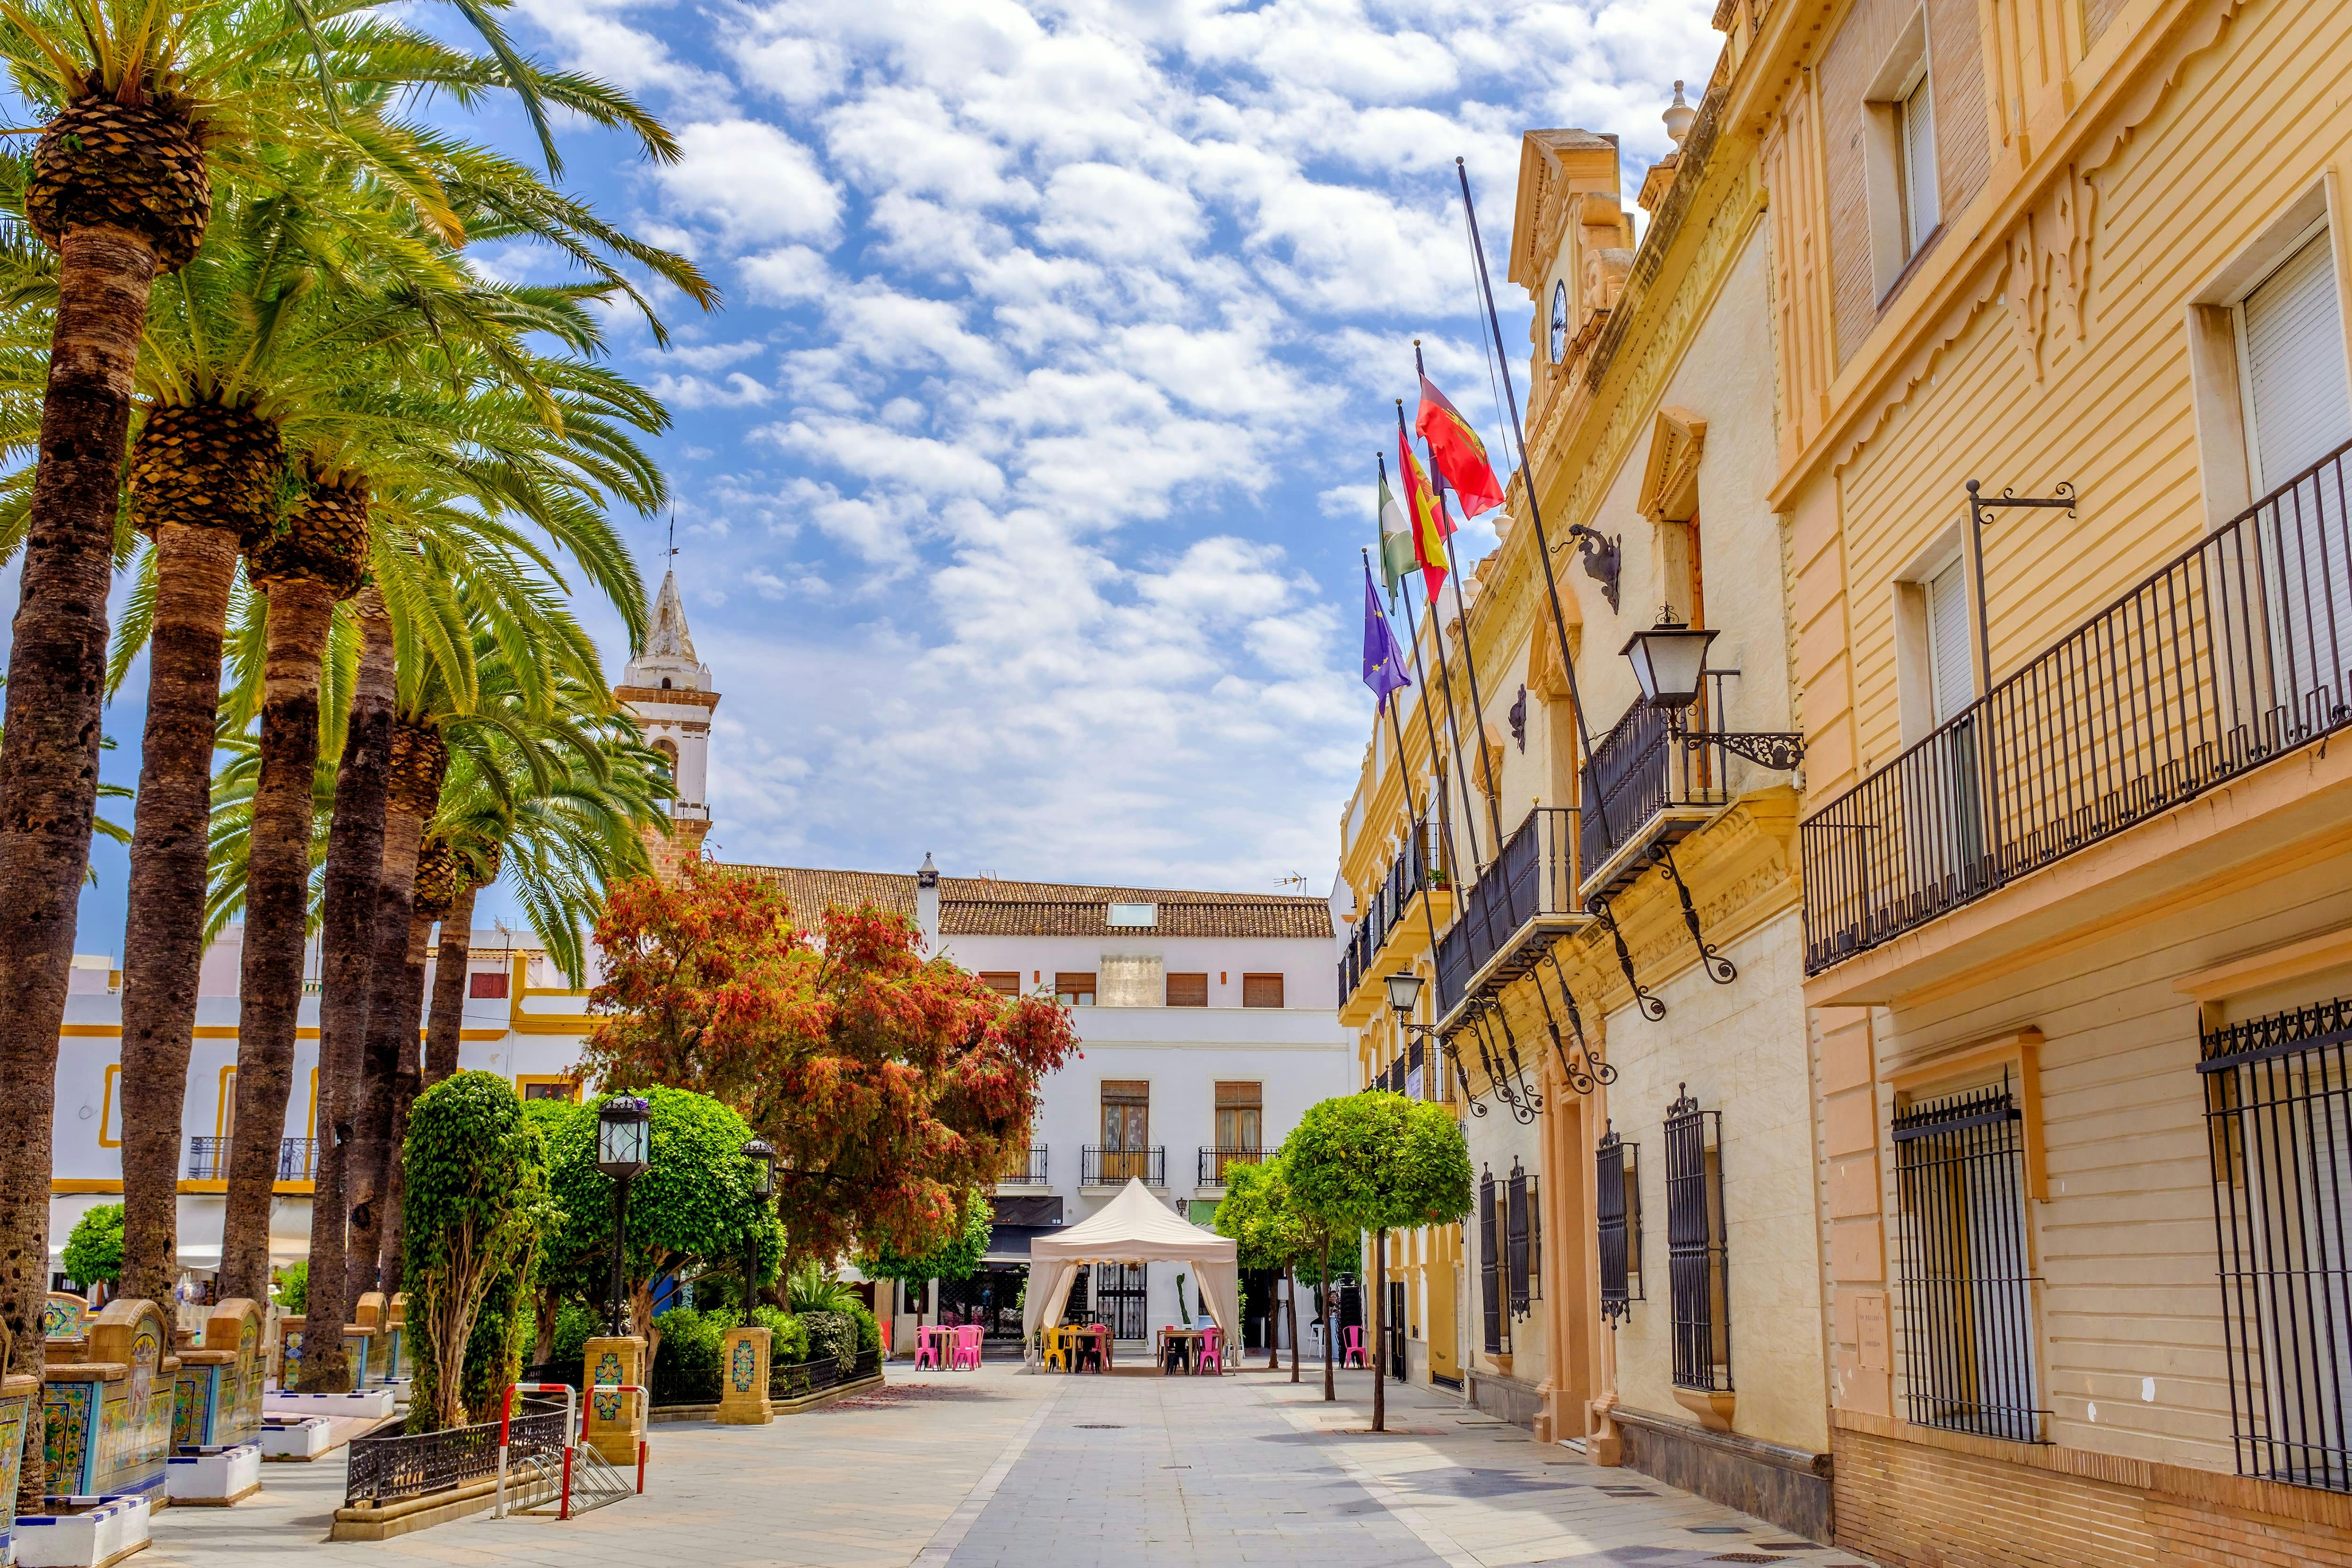 Ayamonte Authentic Andalusia Tour